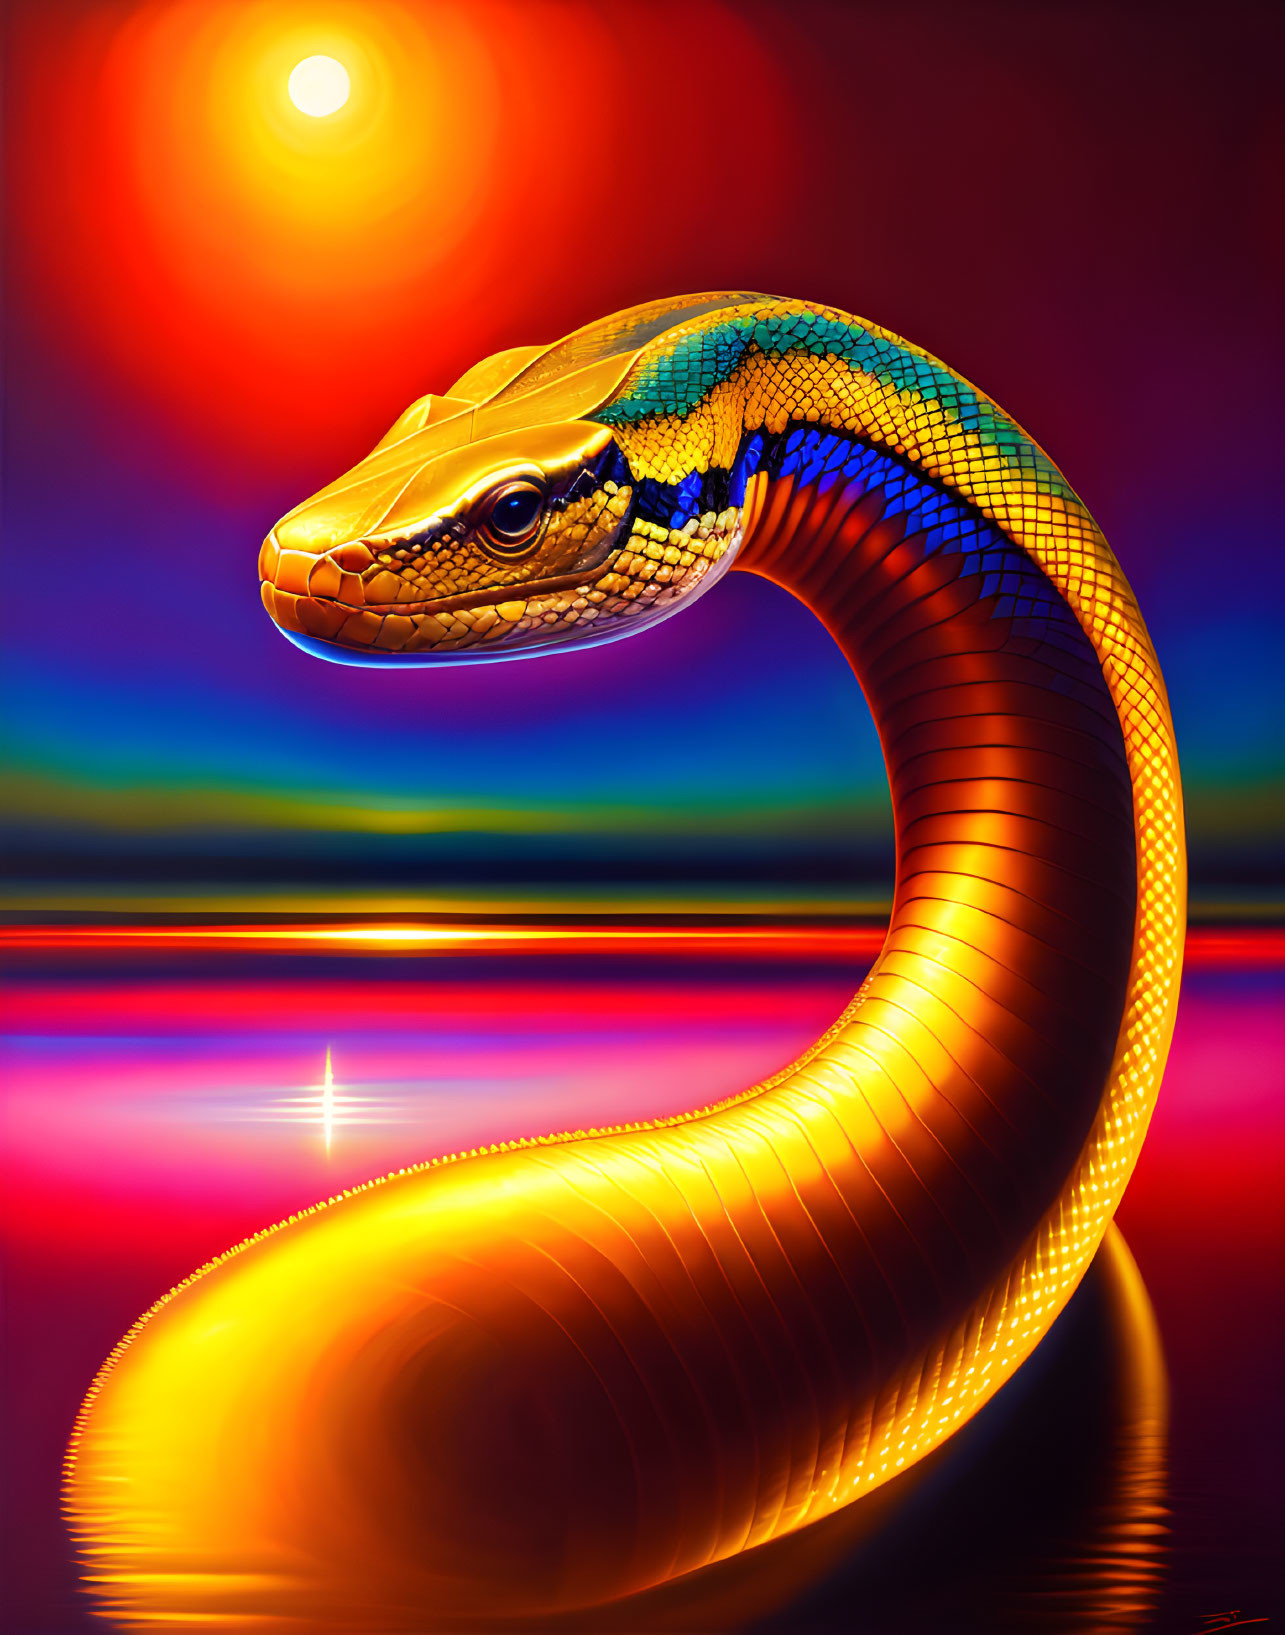 Colorful Snake Artwork Against Sunset Background with Water Reflections